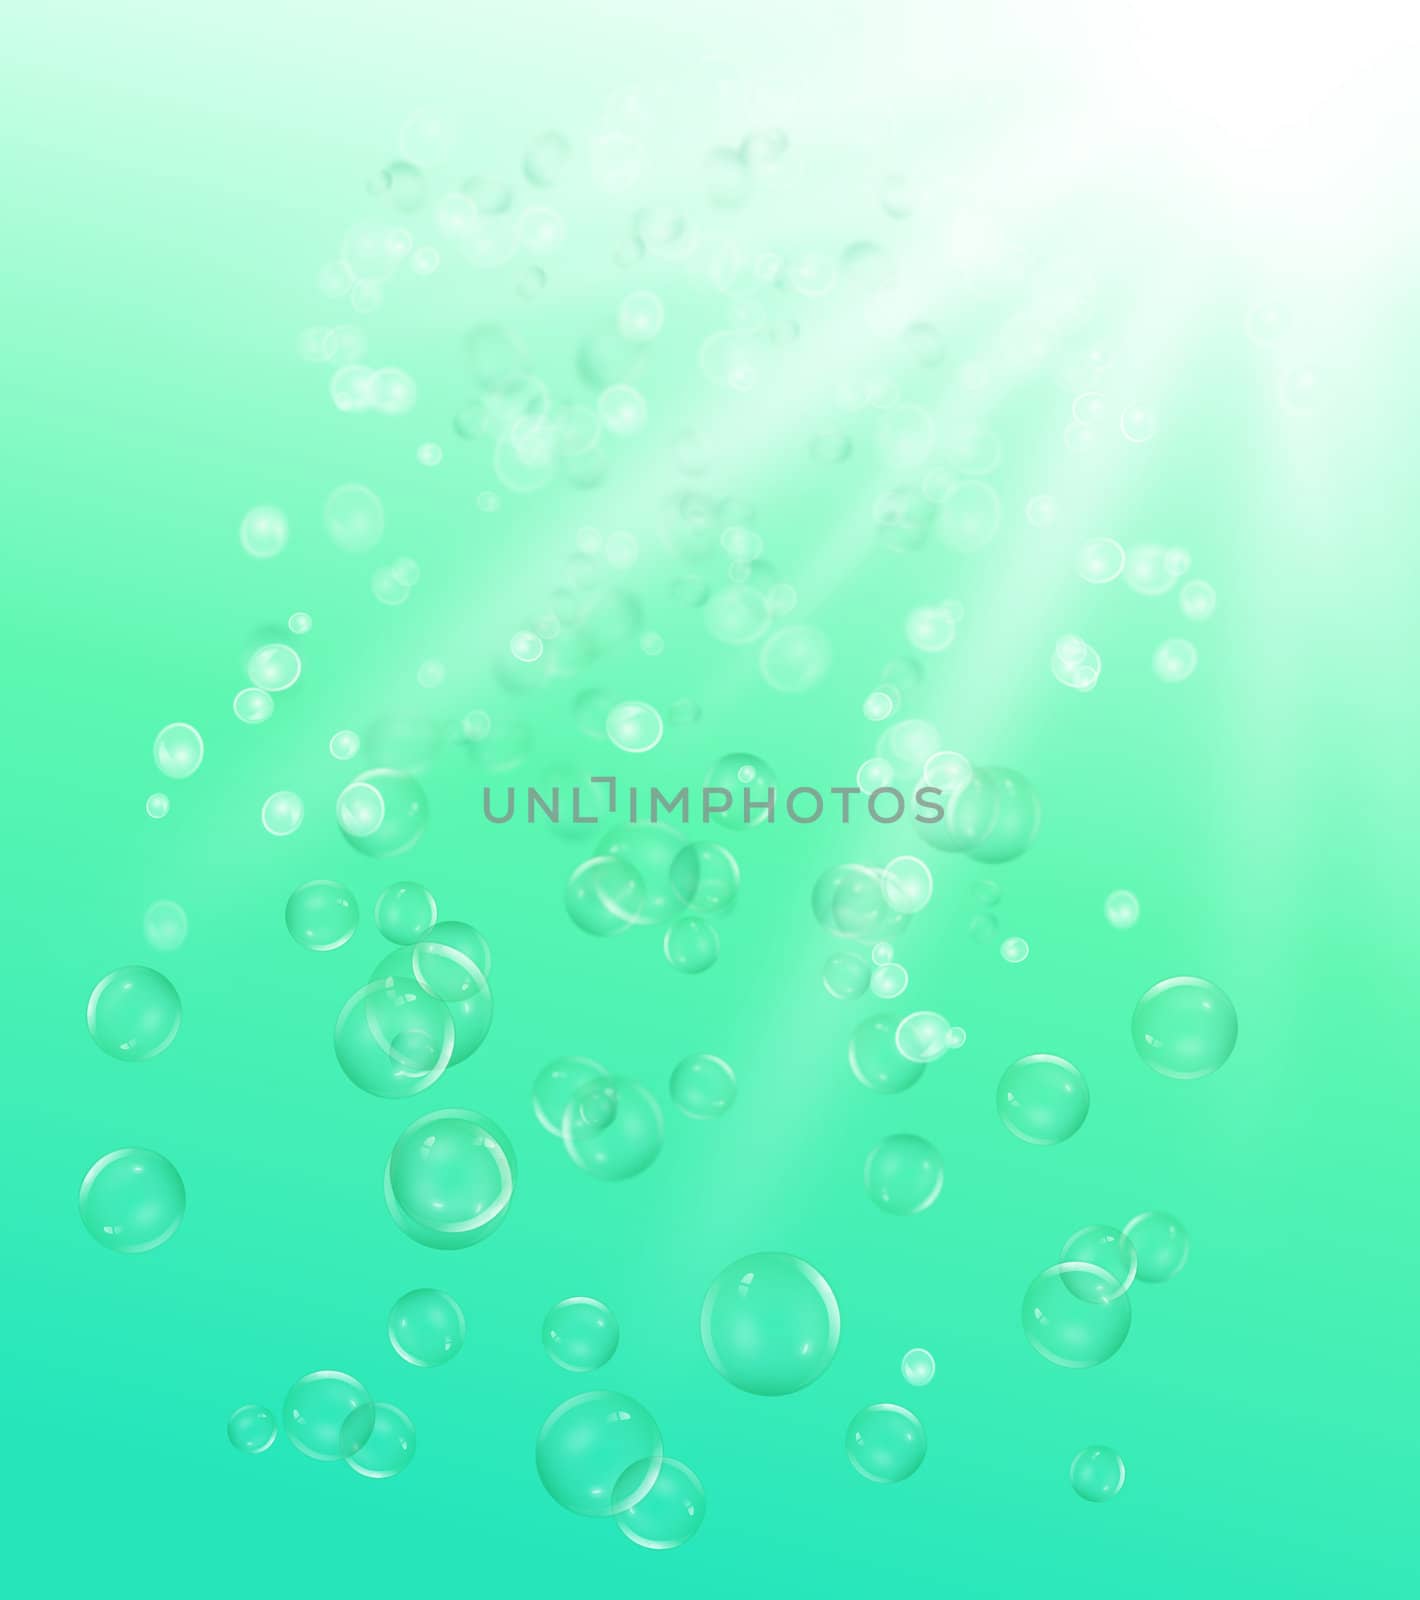 illustration depicting many air bubbles rising from the depths of a green body of water towards the surface.